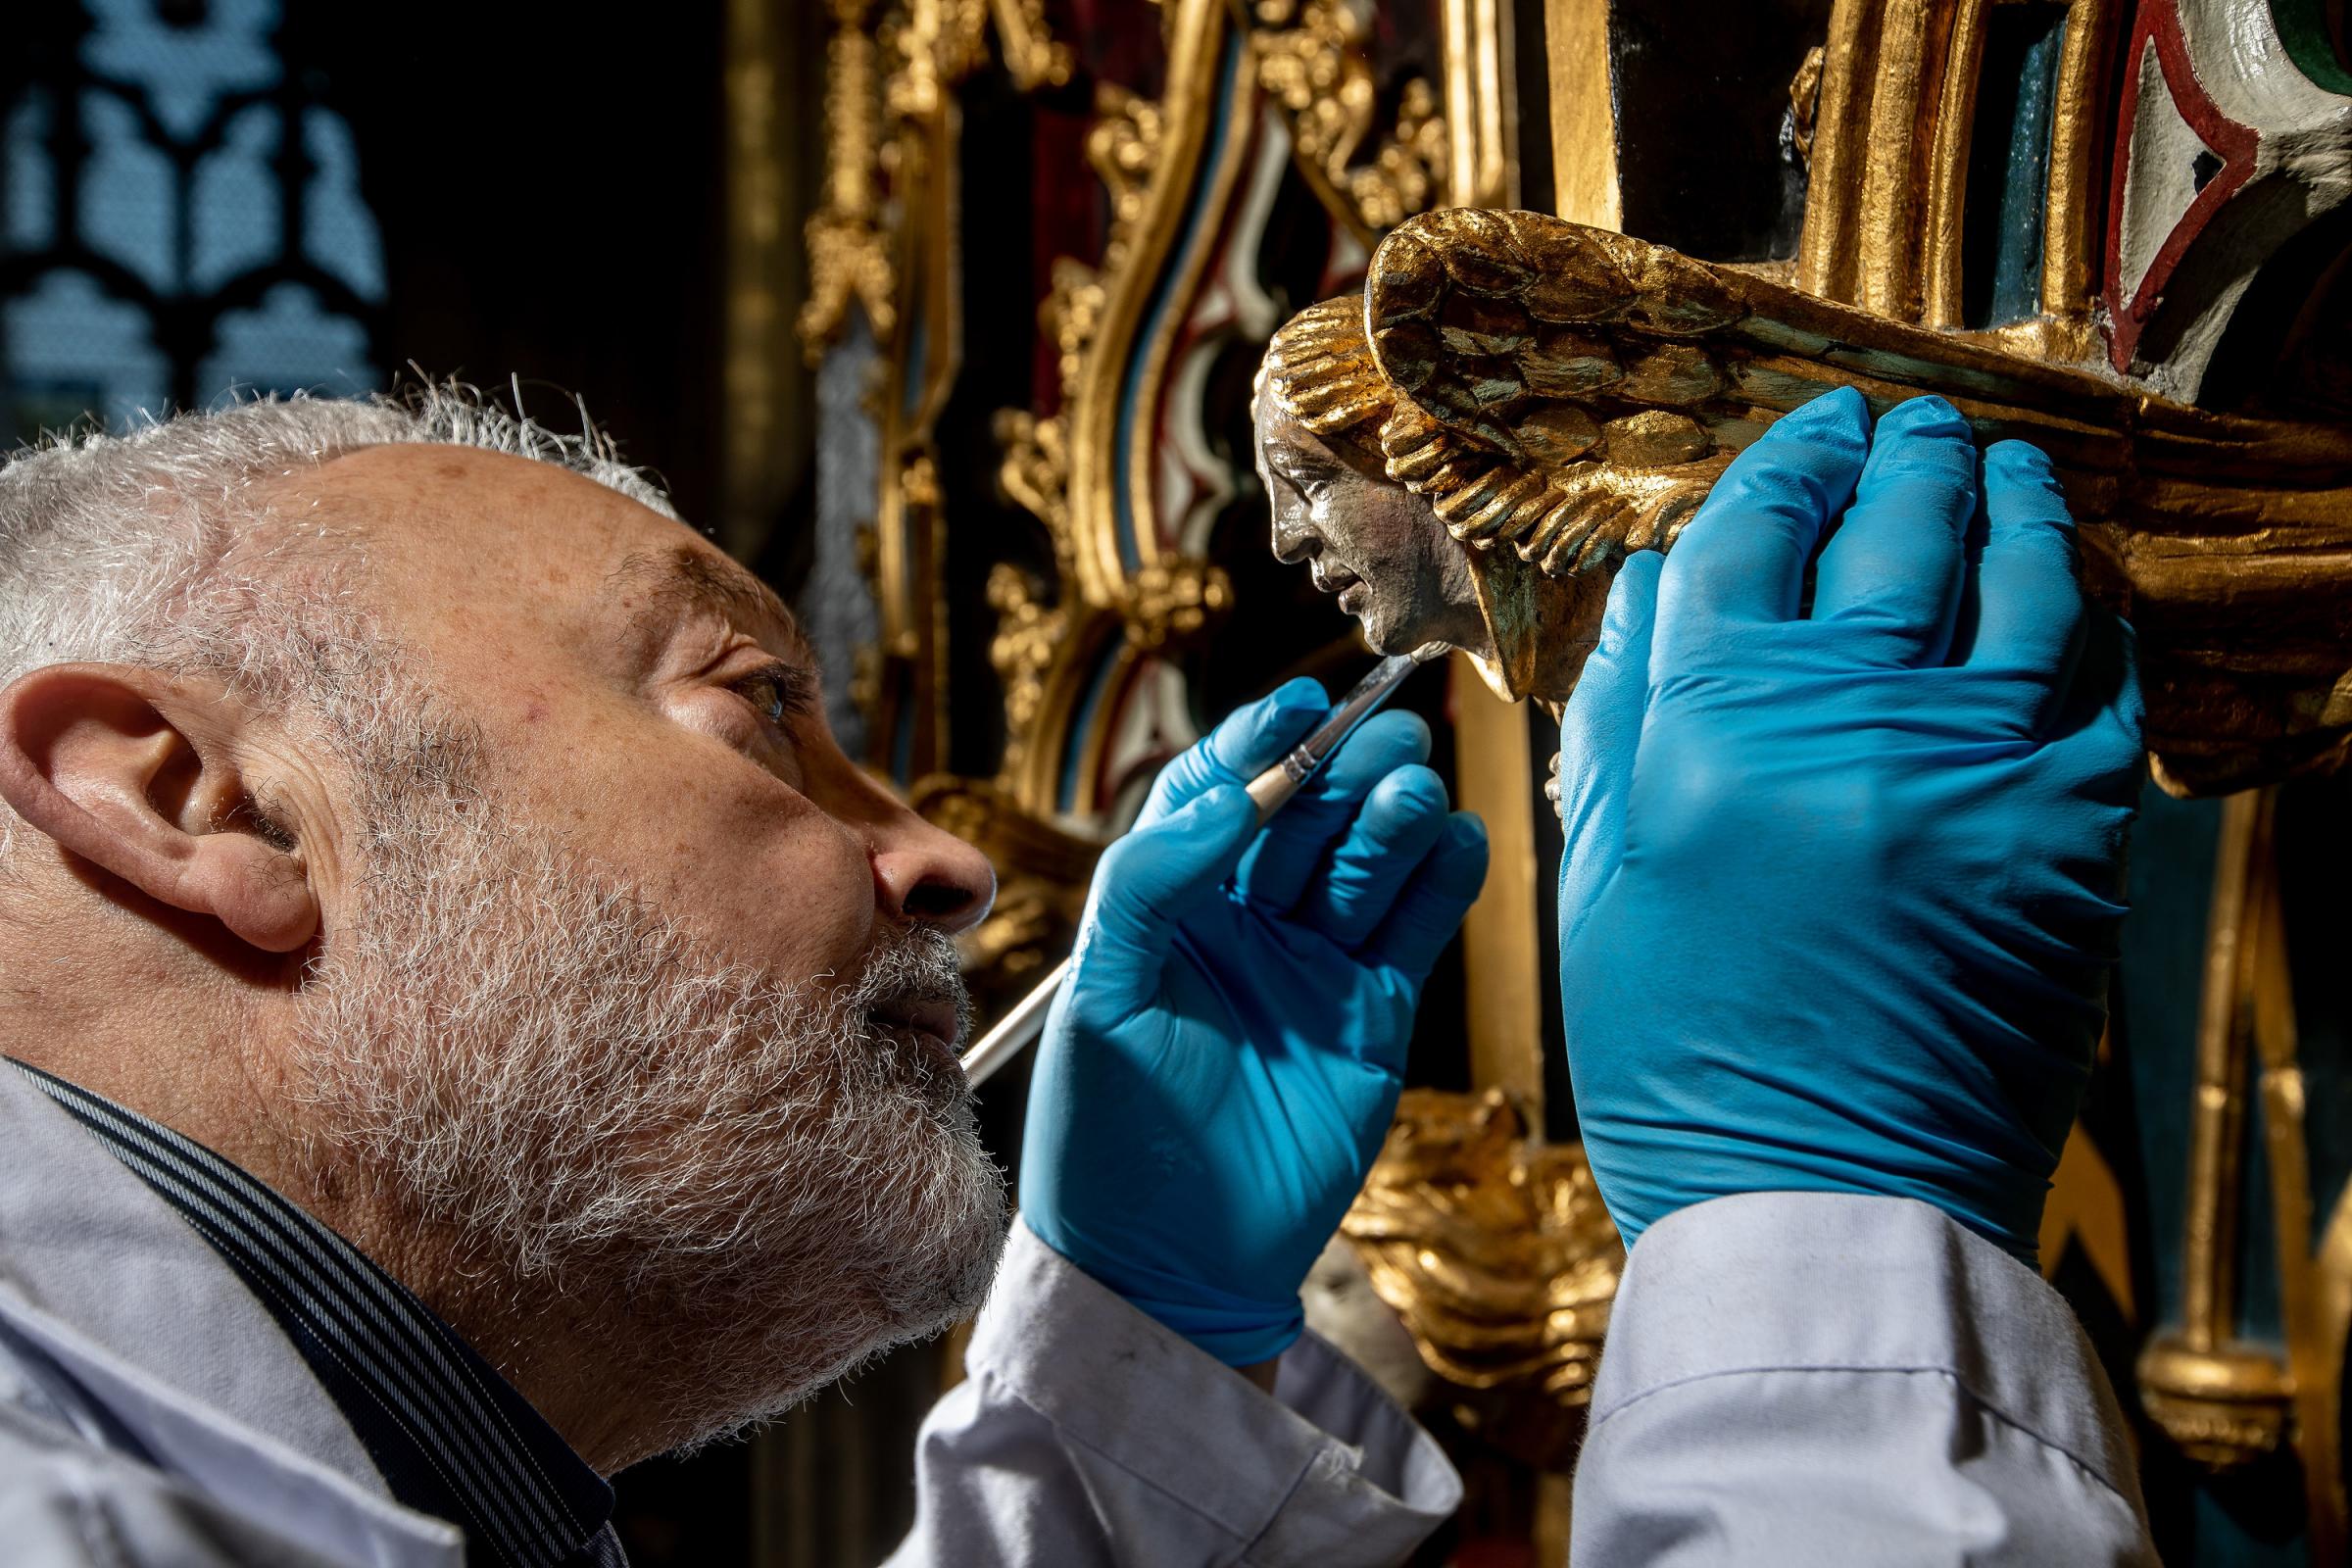 Conservators complete final work in decade-long project at York Minster